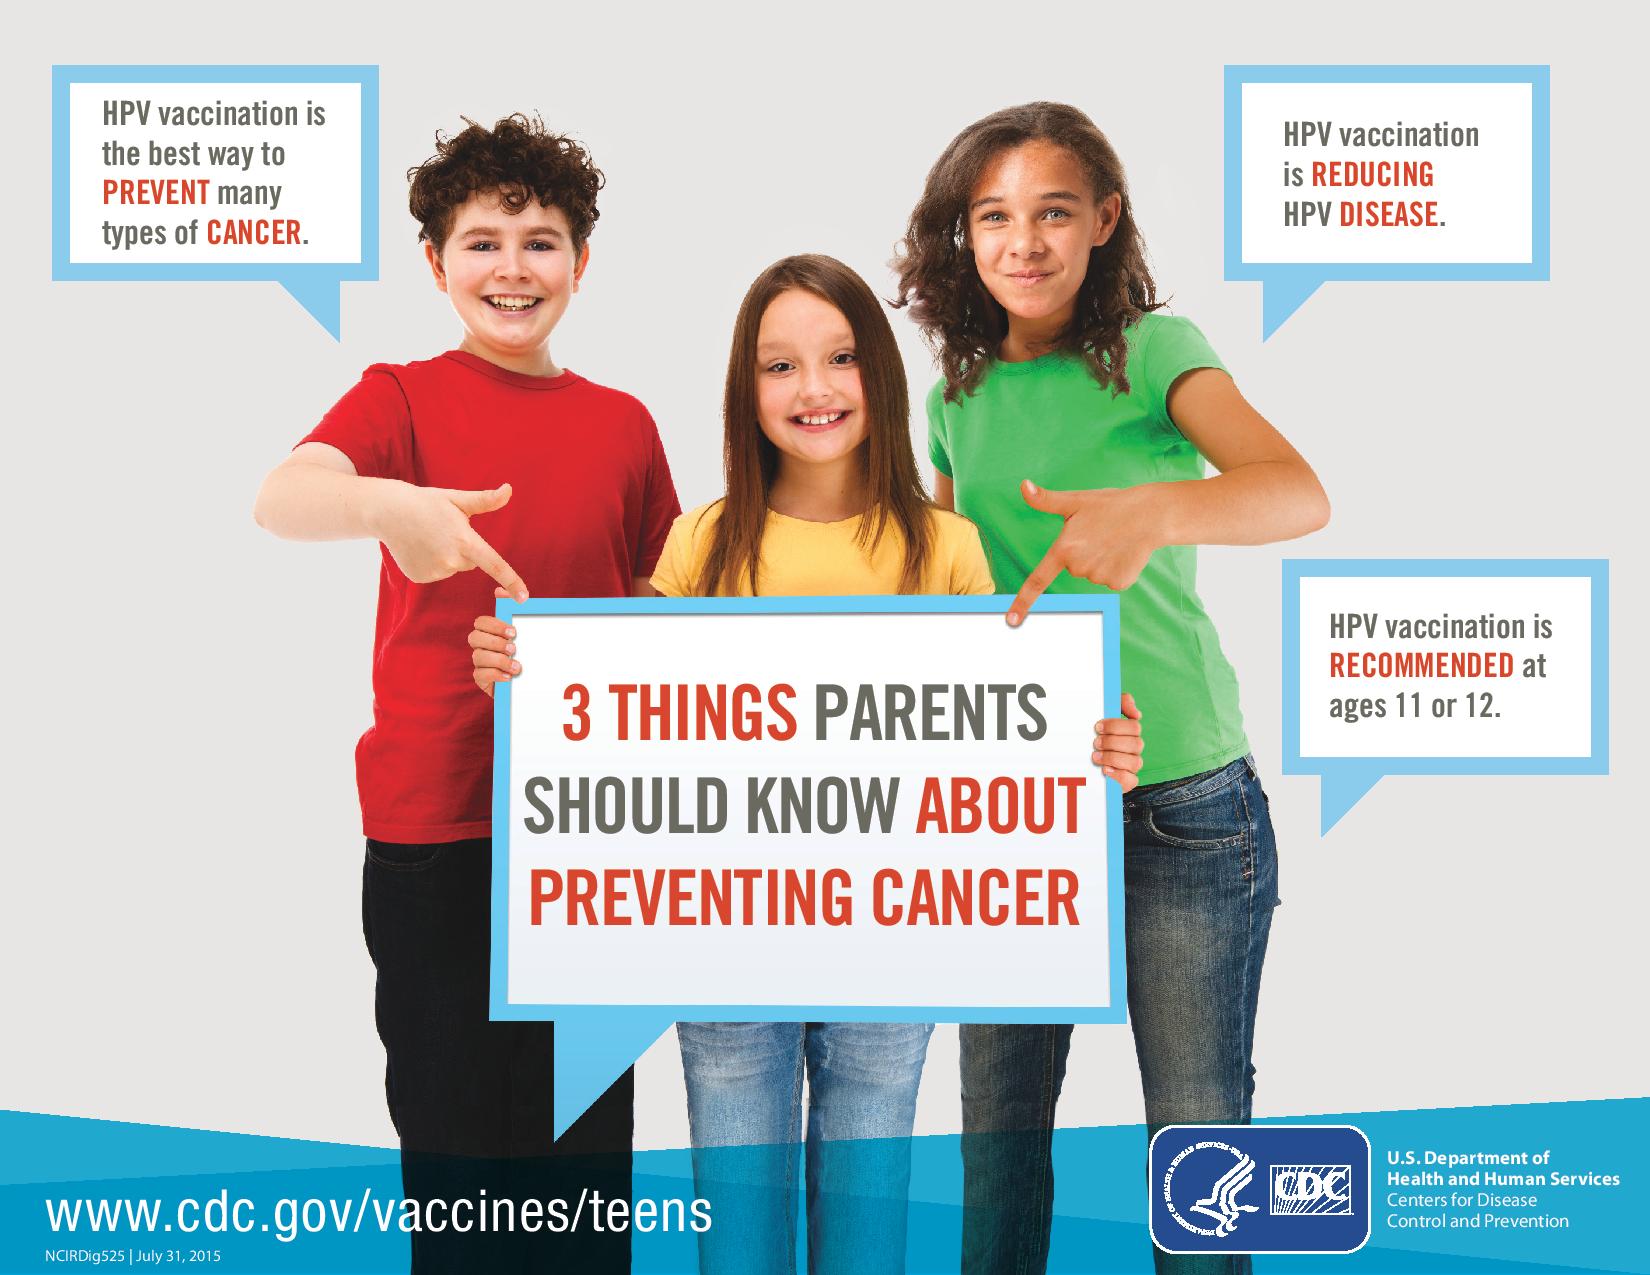 3 Things Parents Should know about Preventing Cancer